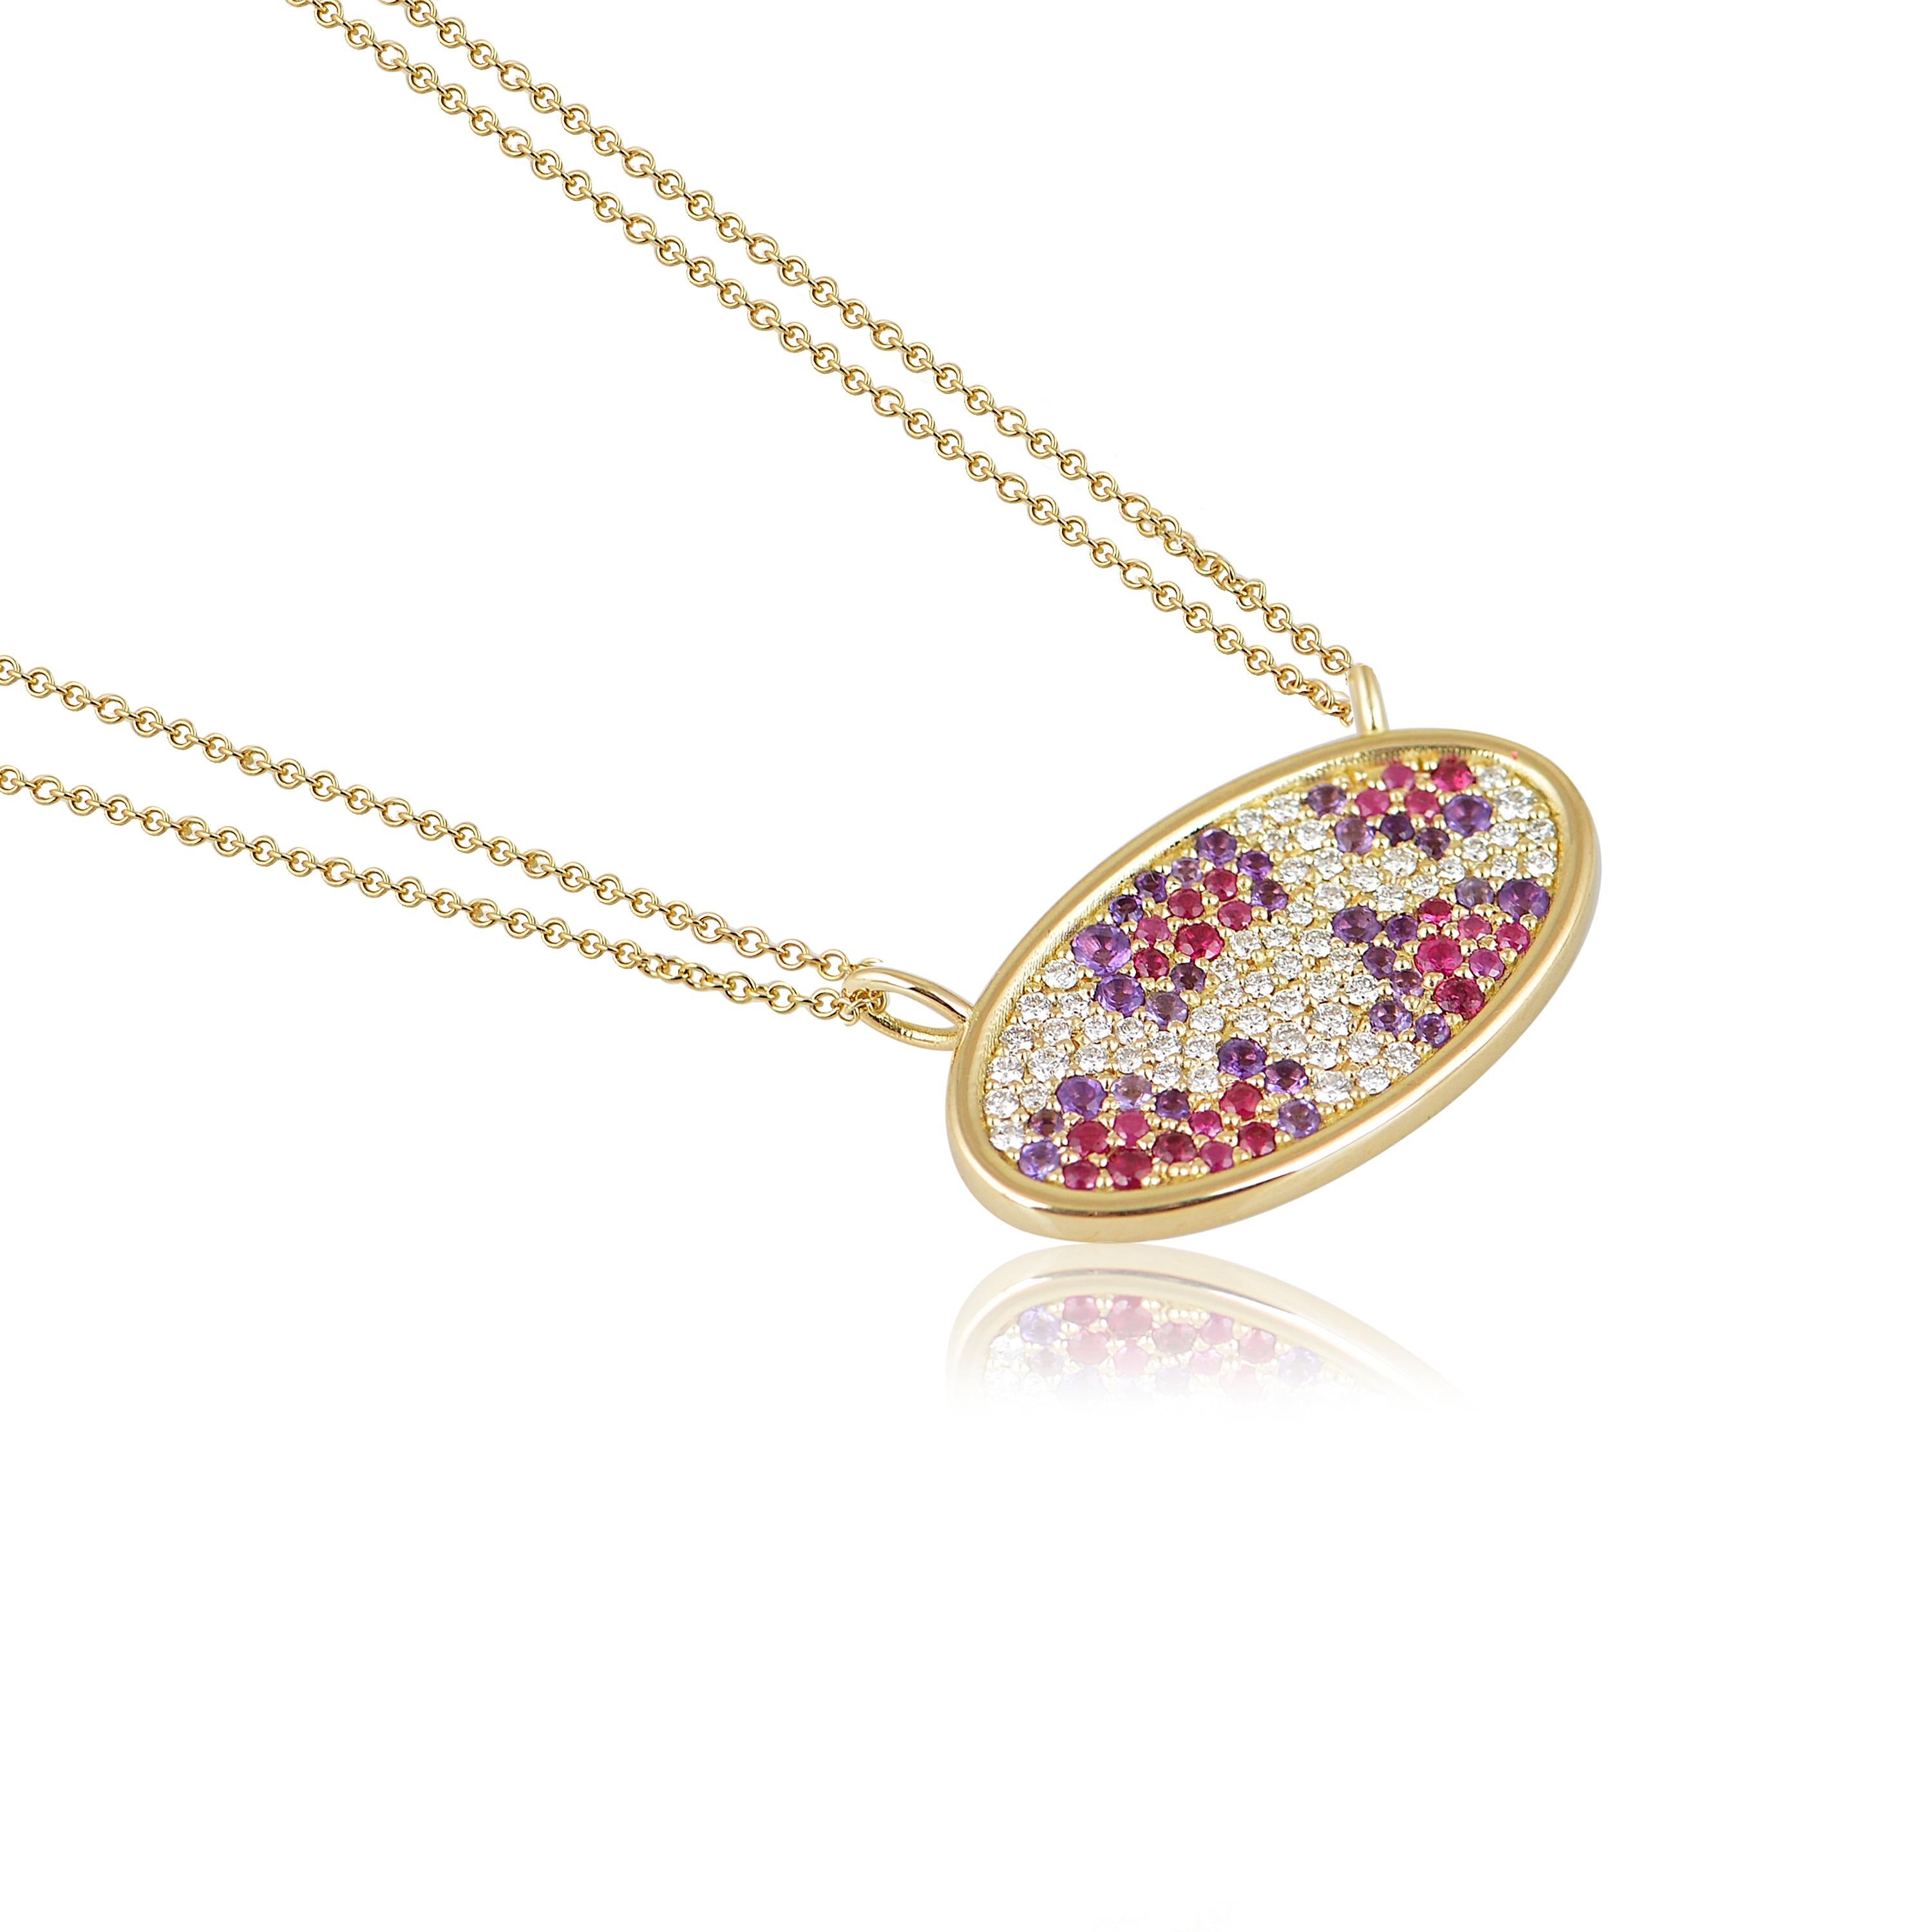 Designer: Alexia Gryllaki

Dimensions: motif 23x13mm, double-chain 800mm (half when folded)
Weight: approximately 5.9g 
Barcode: NEX2004


Leopard print oval pendant in 18 karat yellow gold with a double-chain and mosaic pavé made of round brilliant